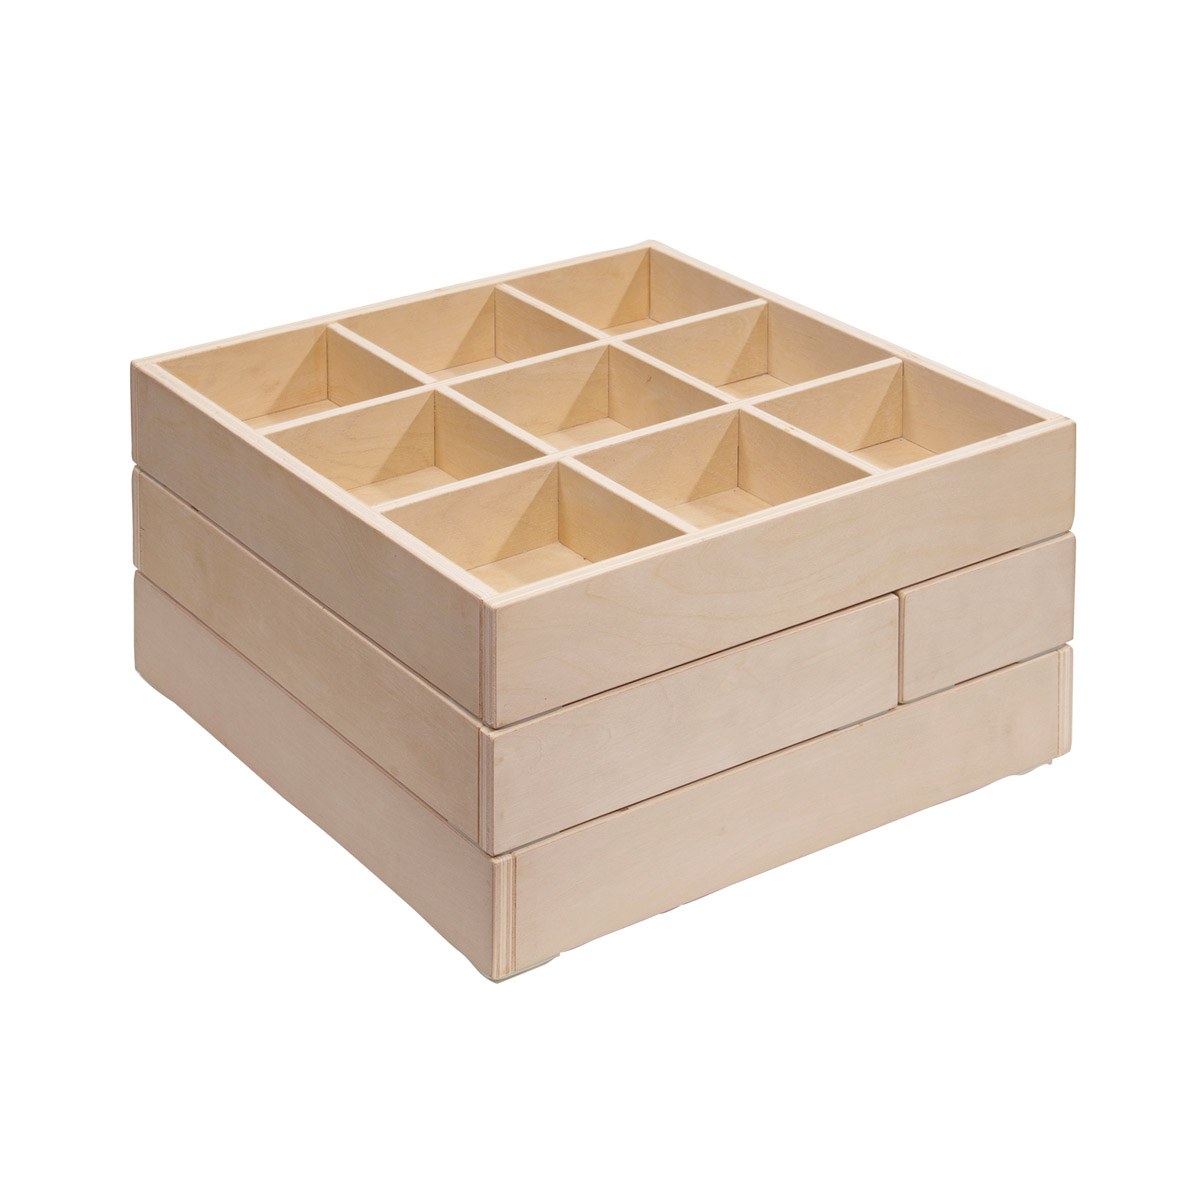 Kaplan Early Learning Company Loose Parts Stacking Wooden Trays - Set of 4